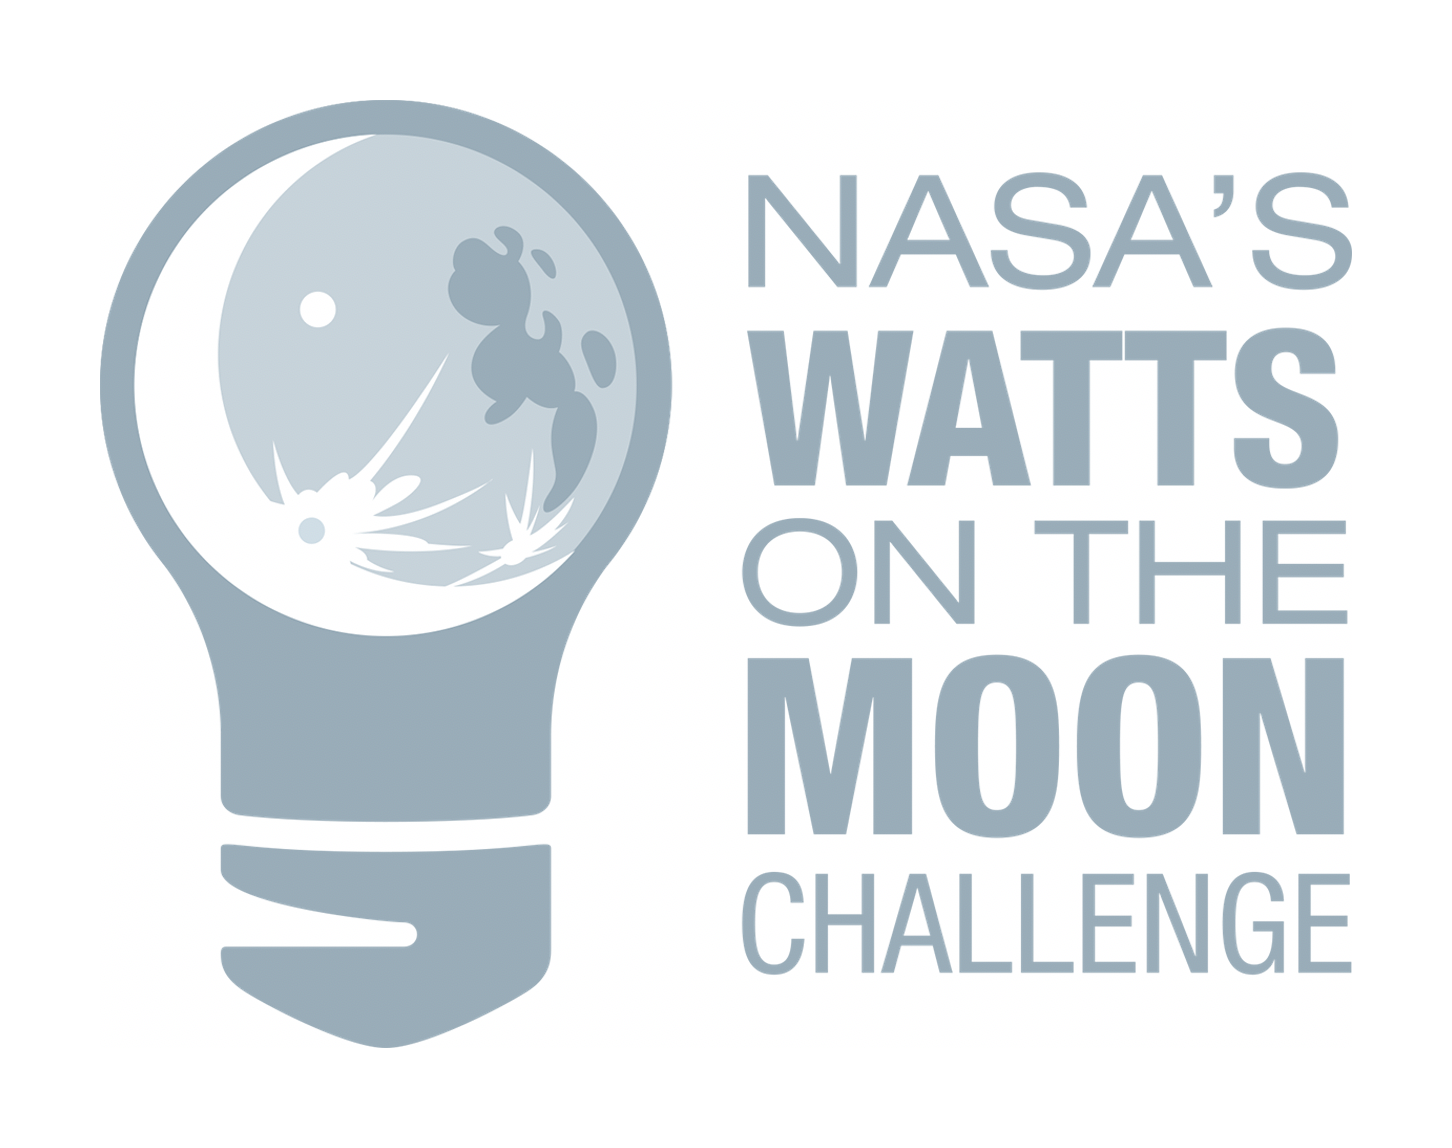 NASA’s newest public prize competition, the Watts on the Moon Challenge, is officially open and accepting submissions. 